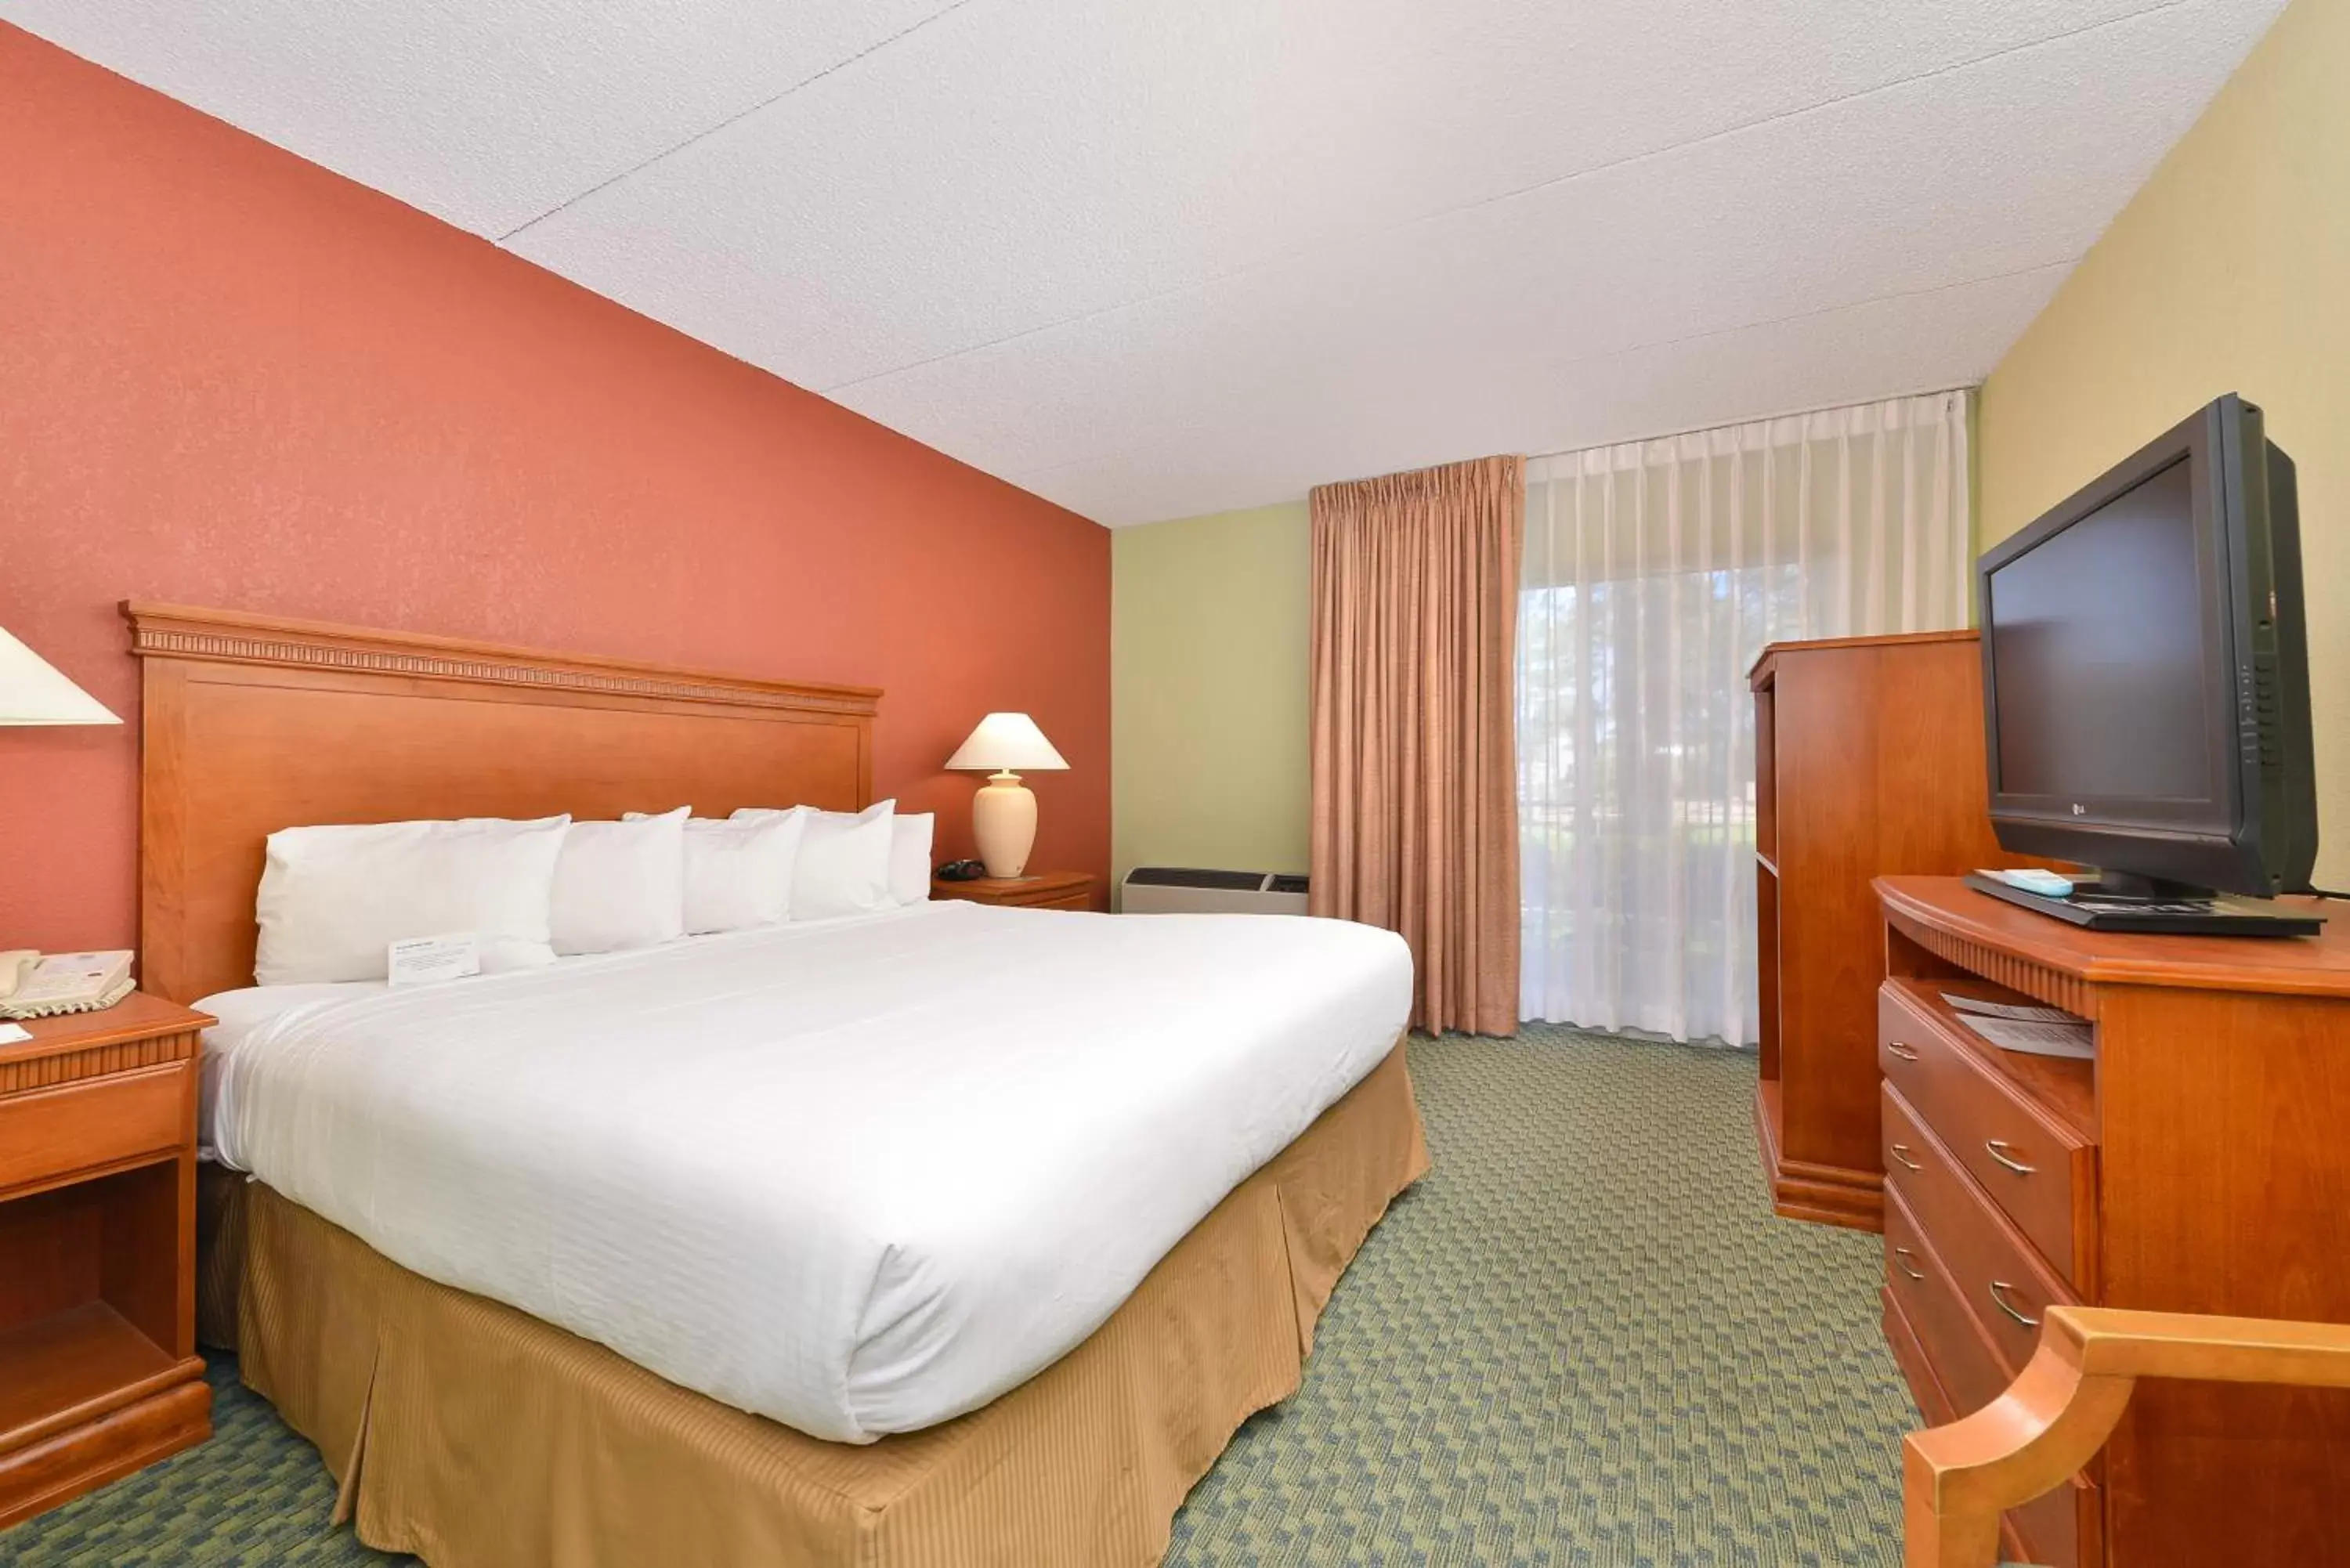 Standard King Room with Work Area and Patio - Non-Smoking in Quality Inn Payson